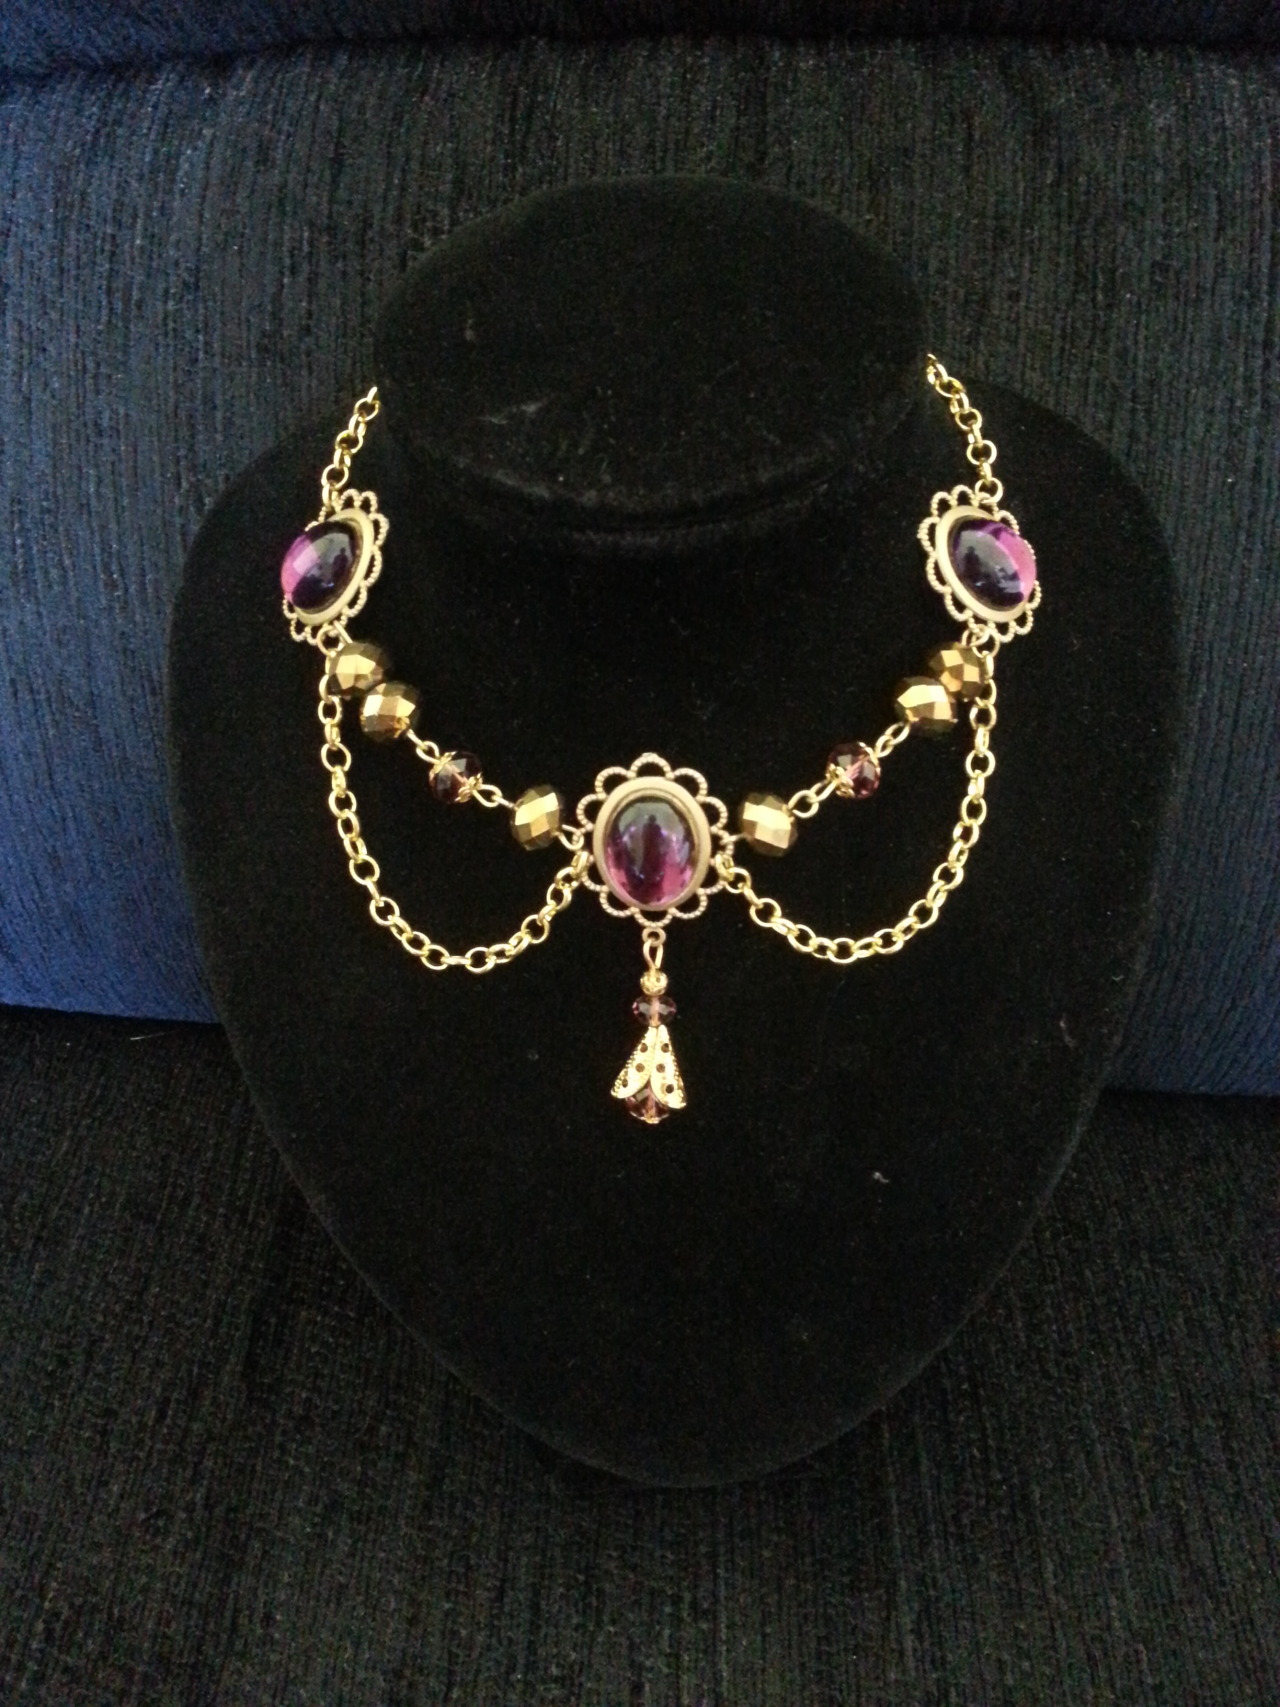 elvendesigns:  Gold tudor style necklace with amethyst stone settings also shown